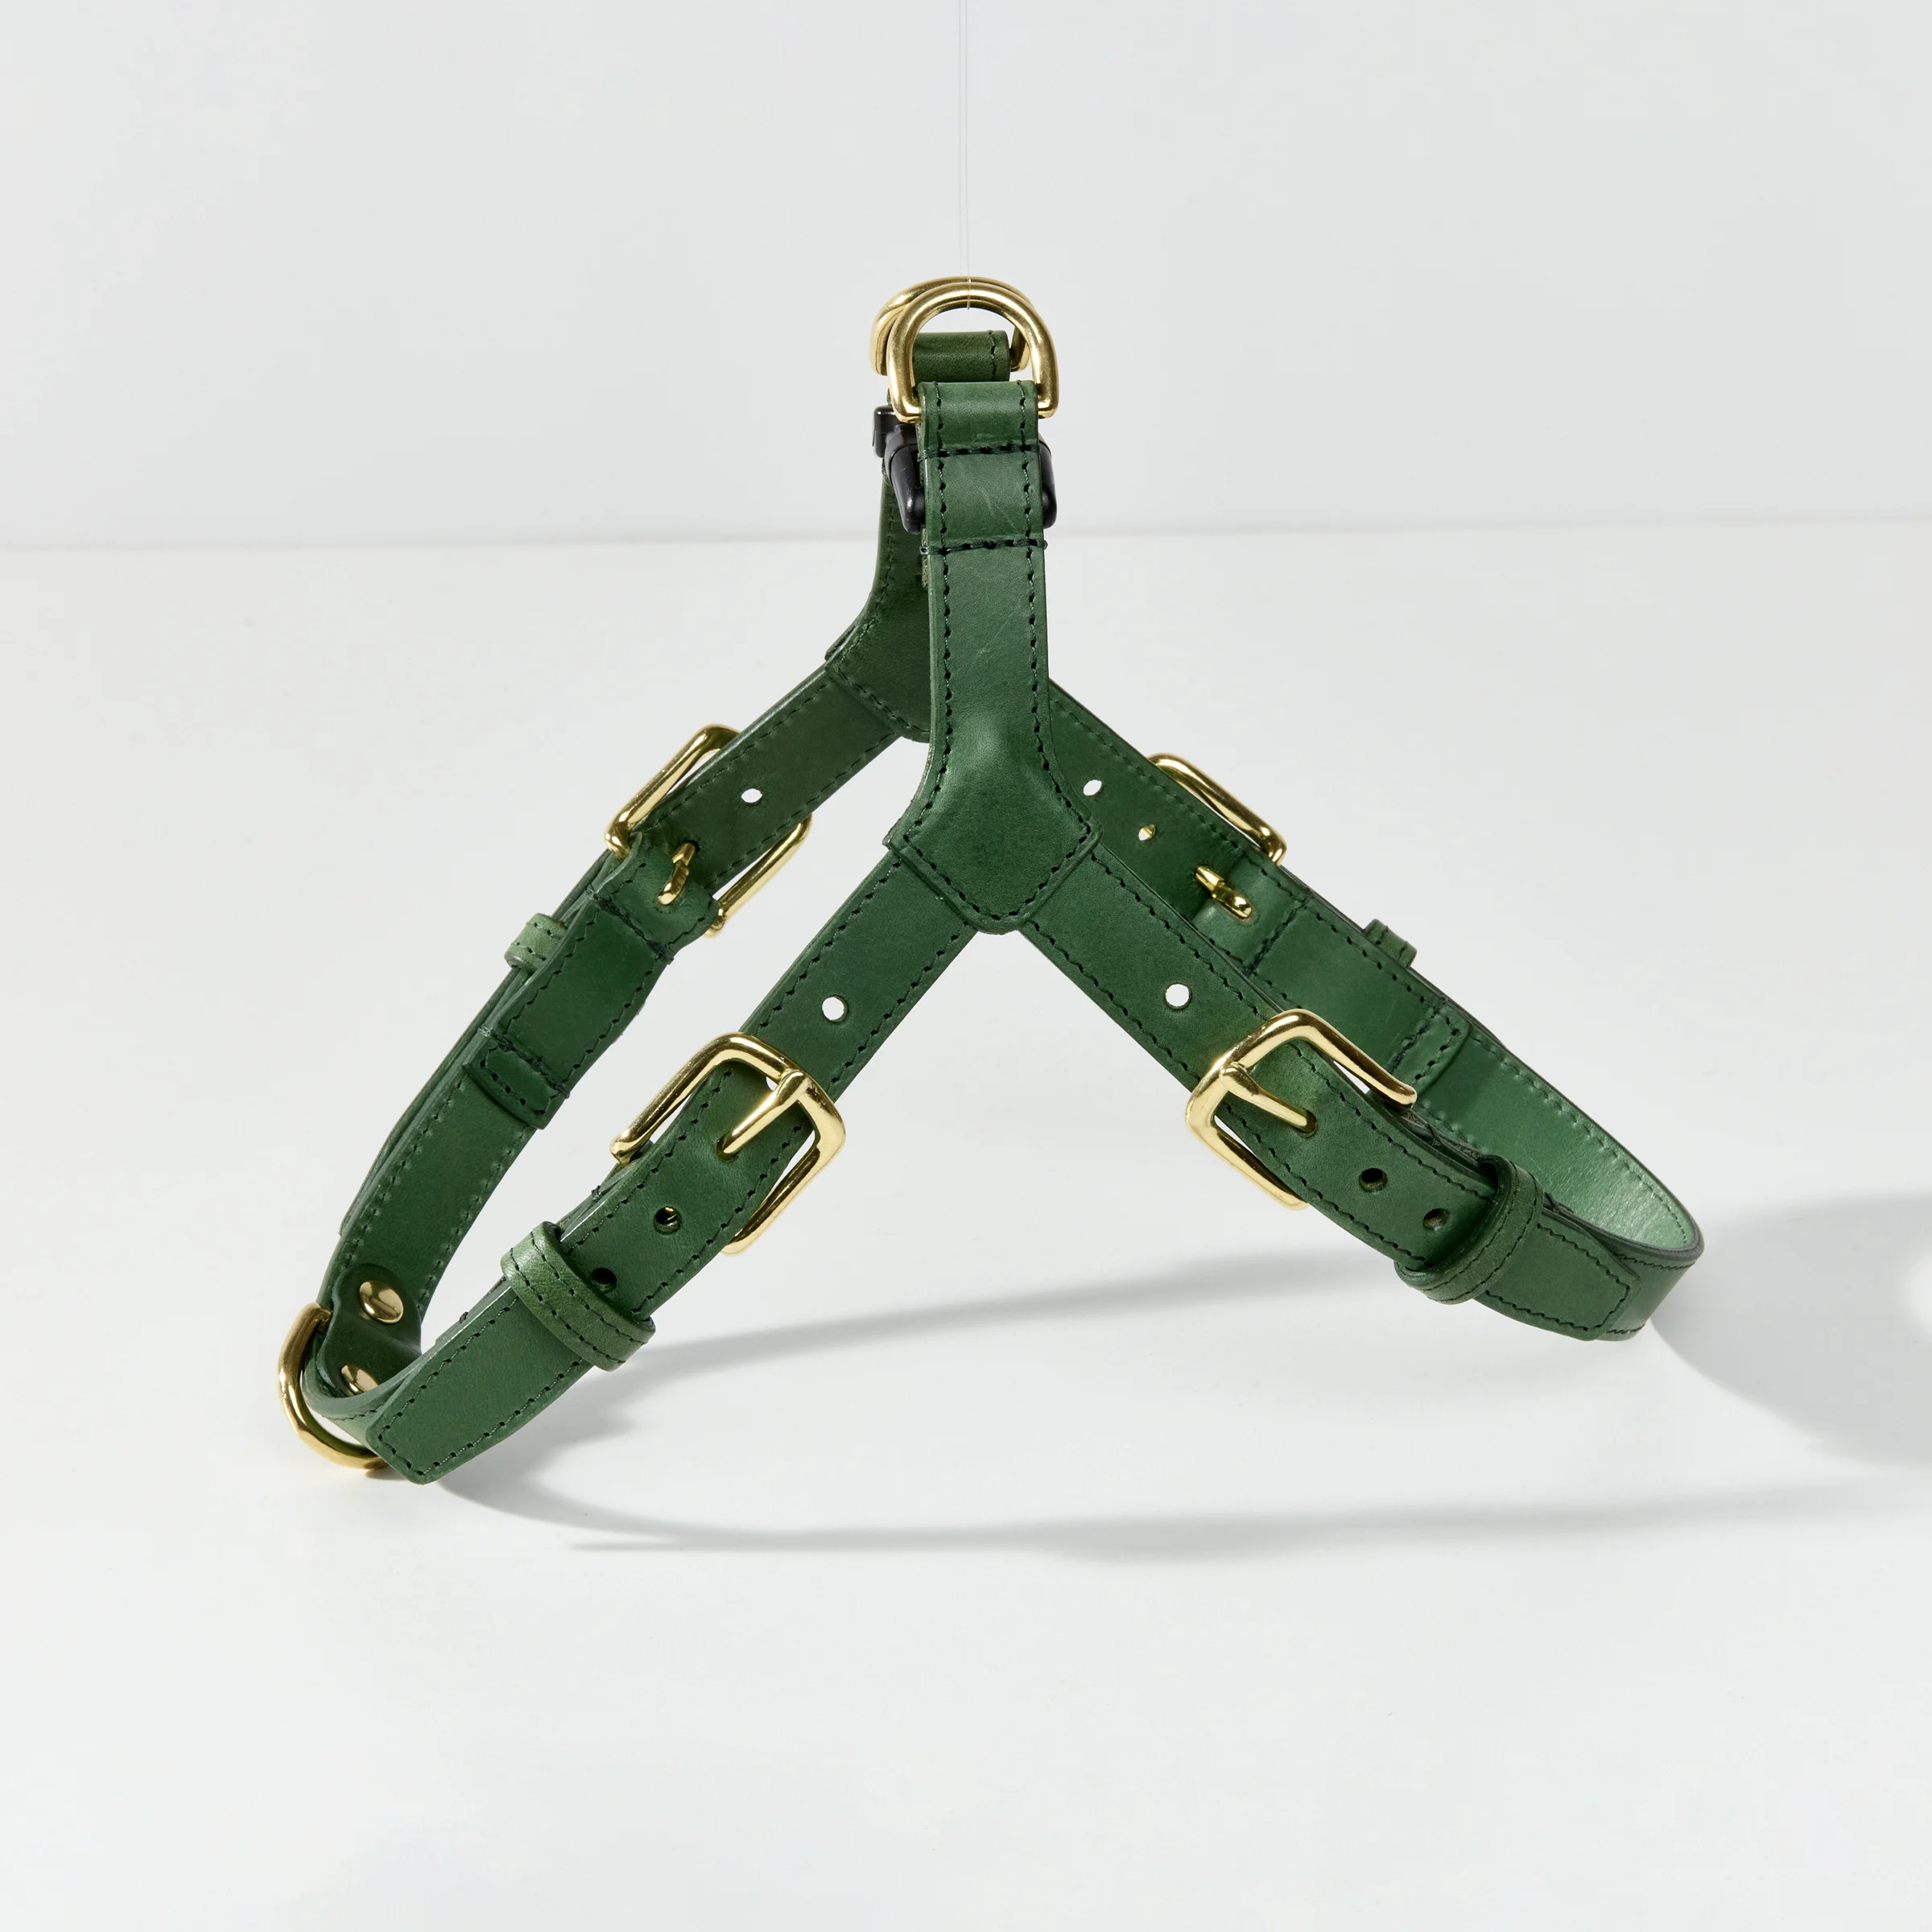 One-click Leather Dog Harness (Green)